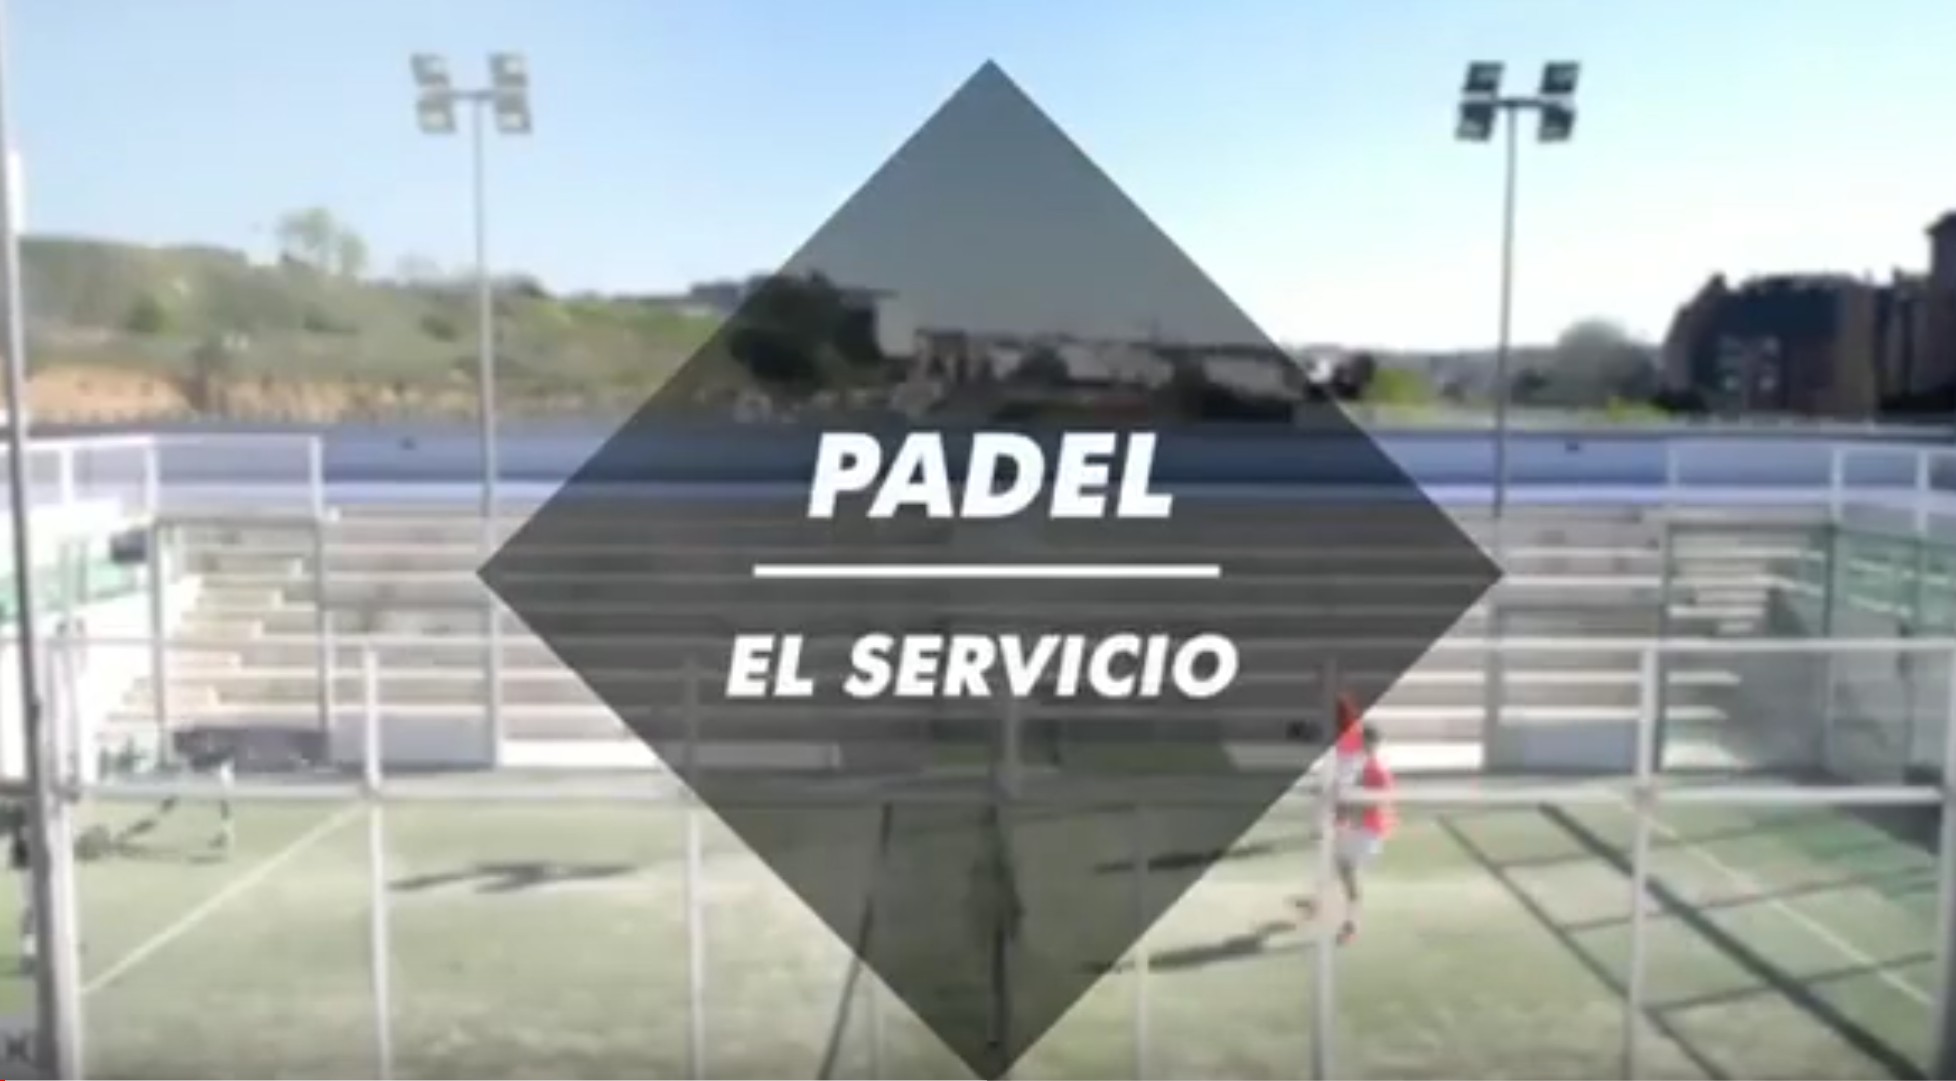 Service at padel - The basis of your commitment